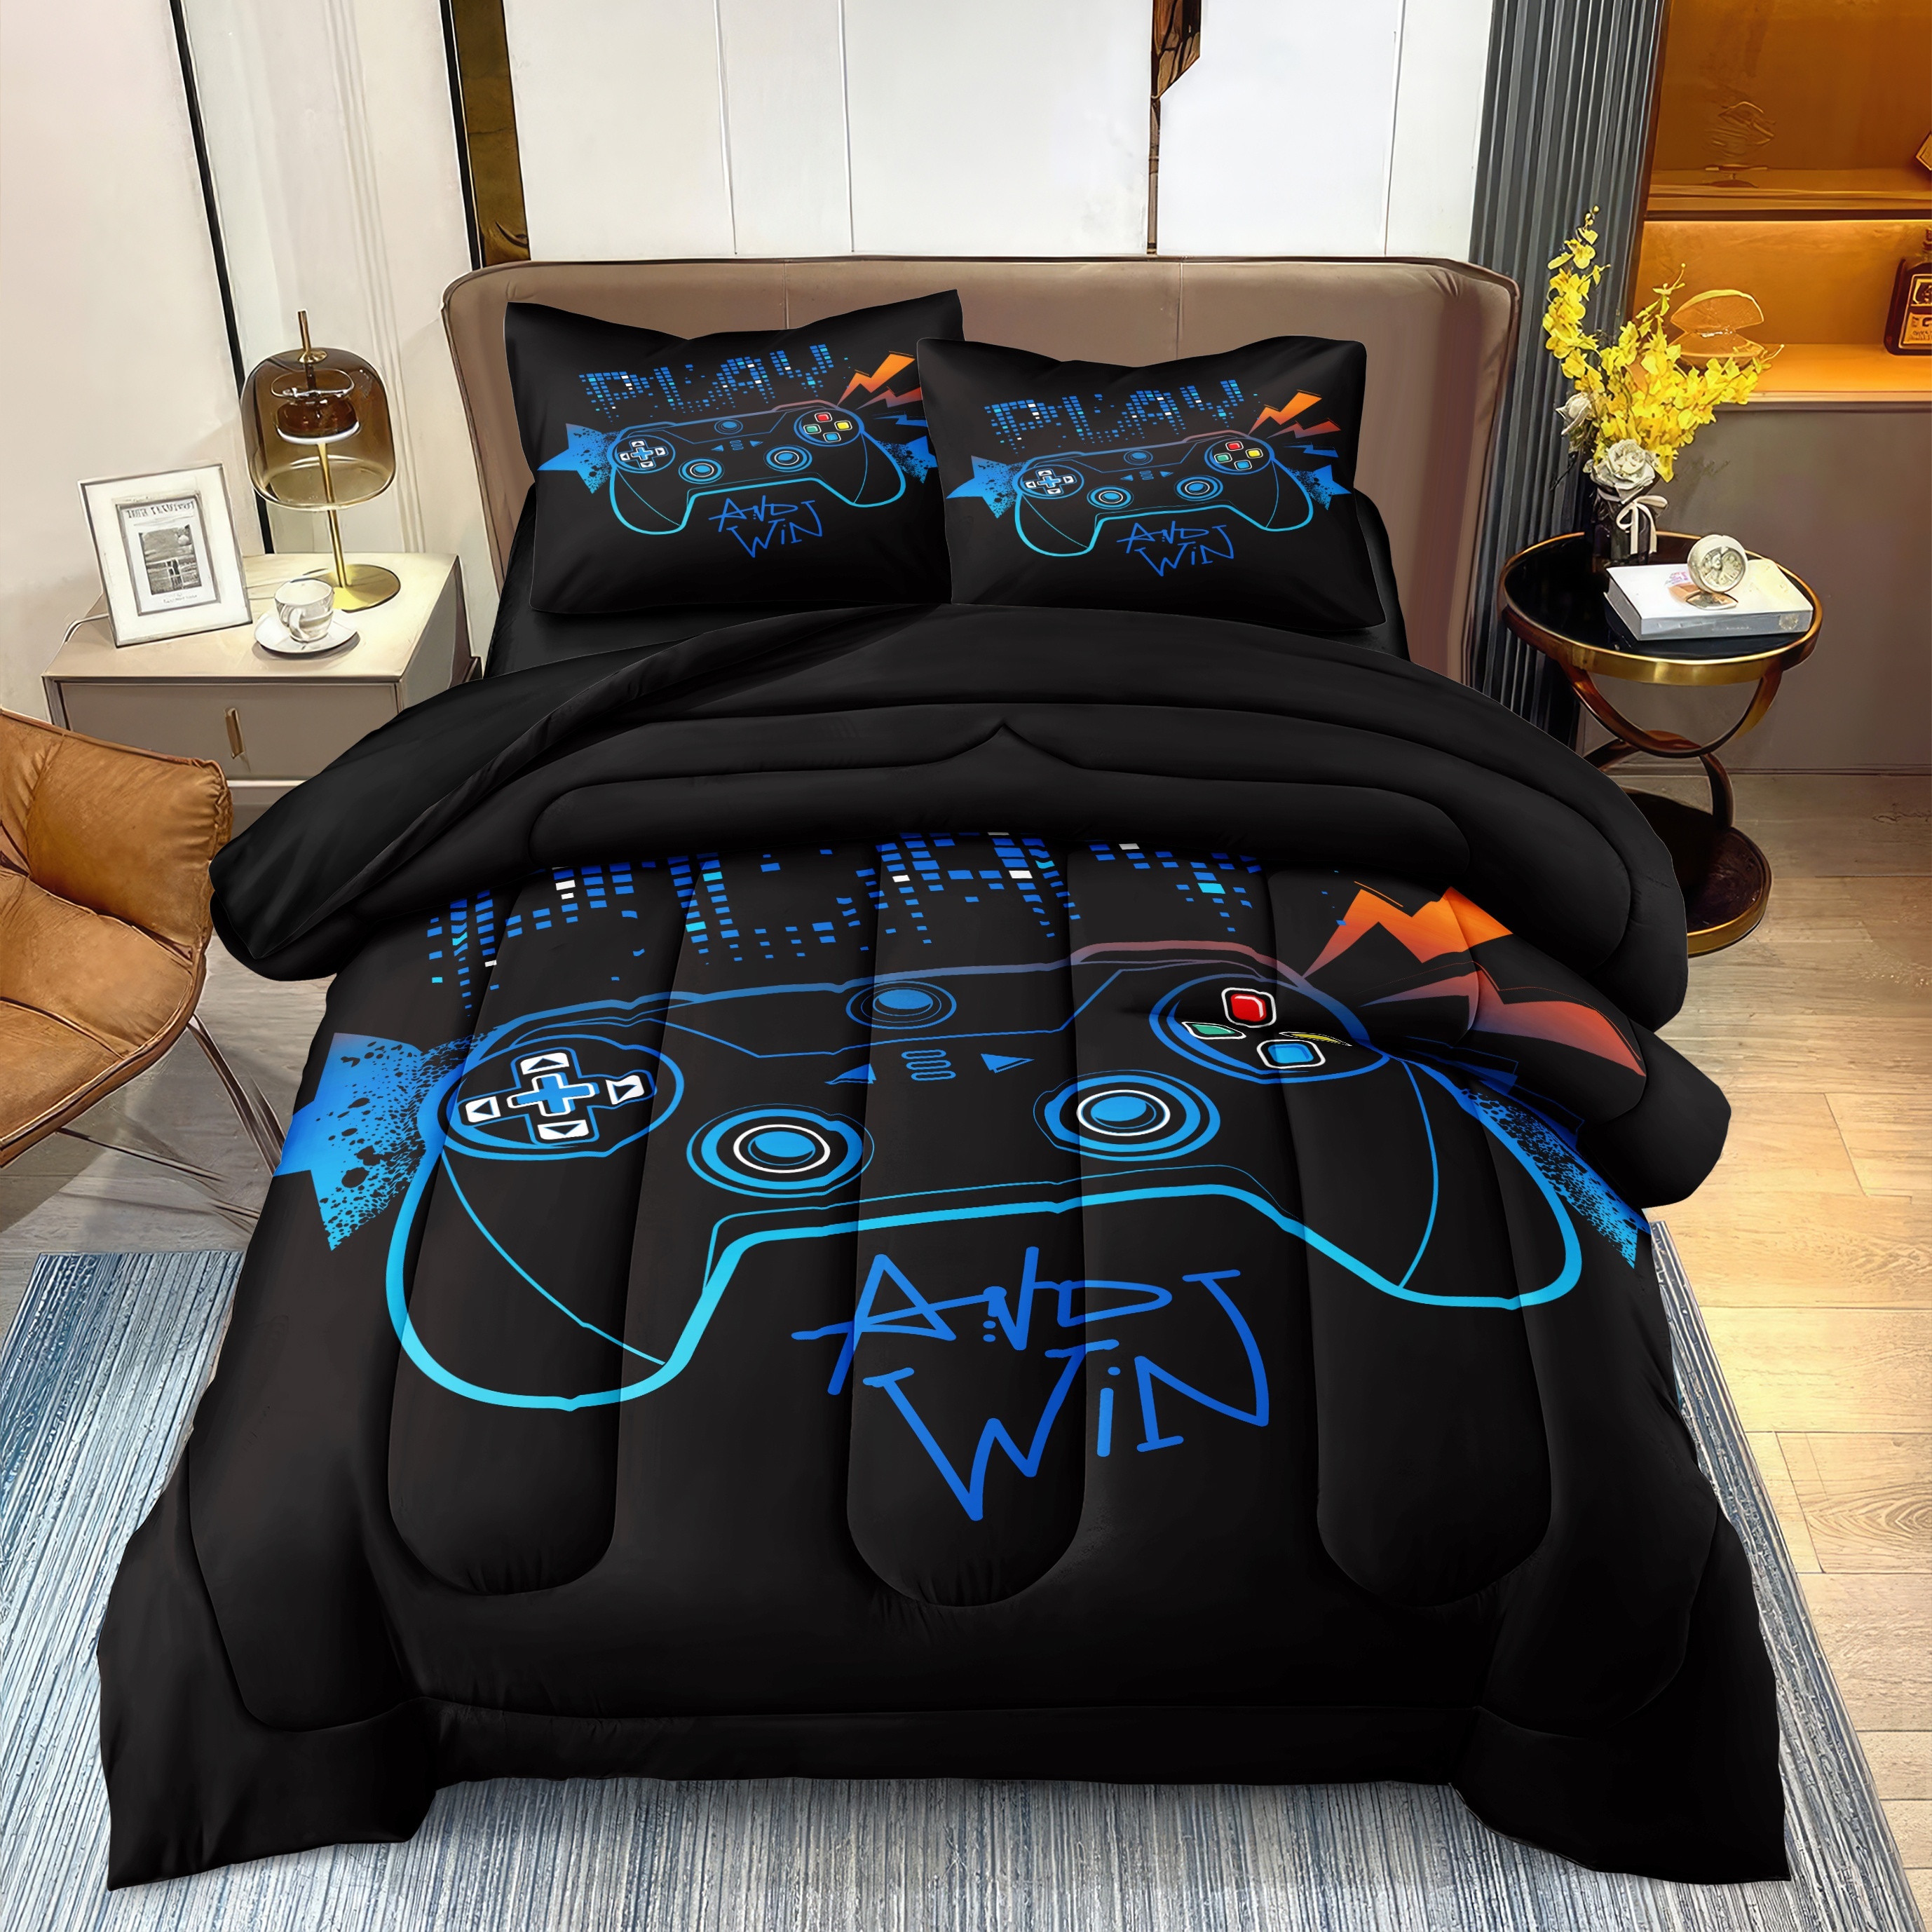 Comforter Set Queen Size, Game Retro Gamepad Gaming Bedding Set for Kids  and Adults Bedroom Decor, Vintage Colorful Kids Comforter Set and 2 Pillow